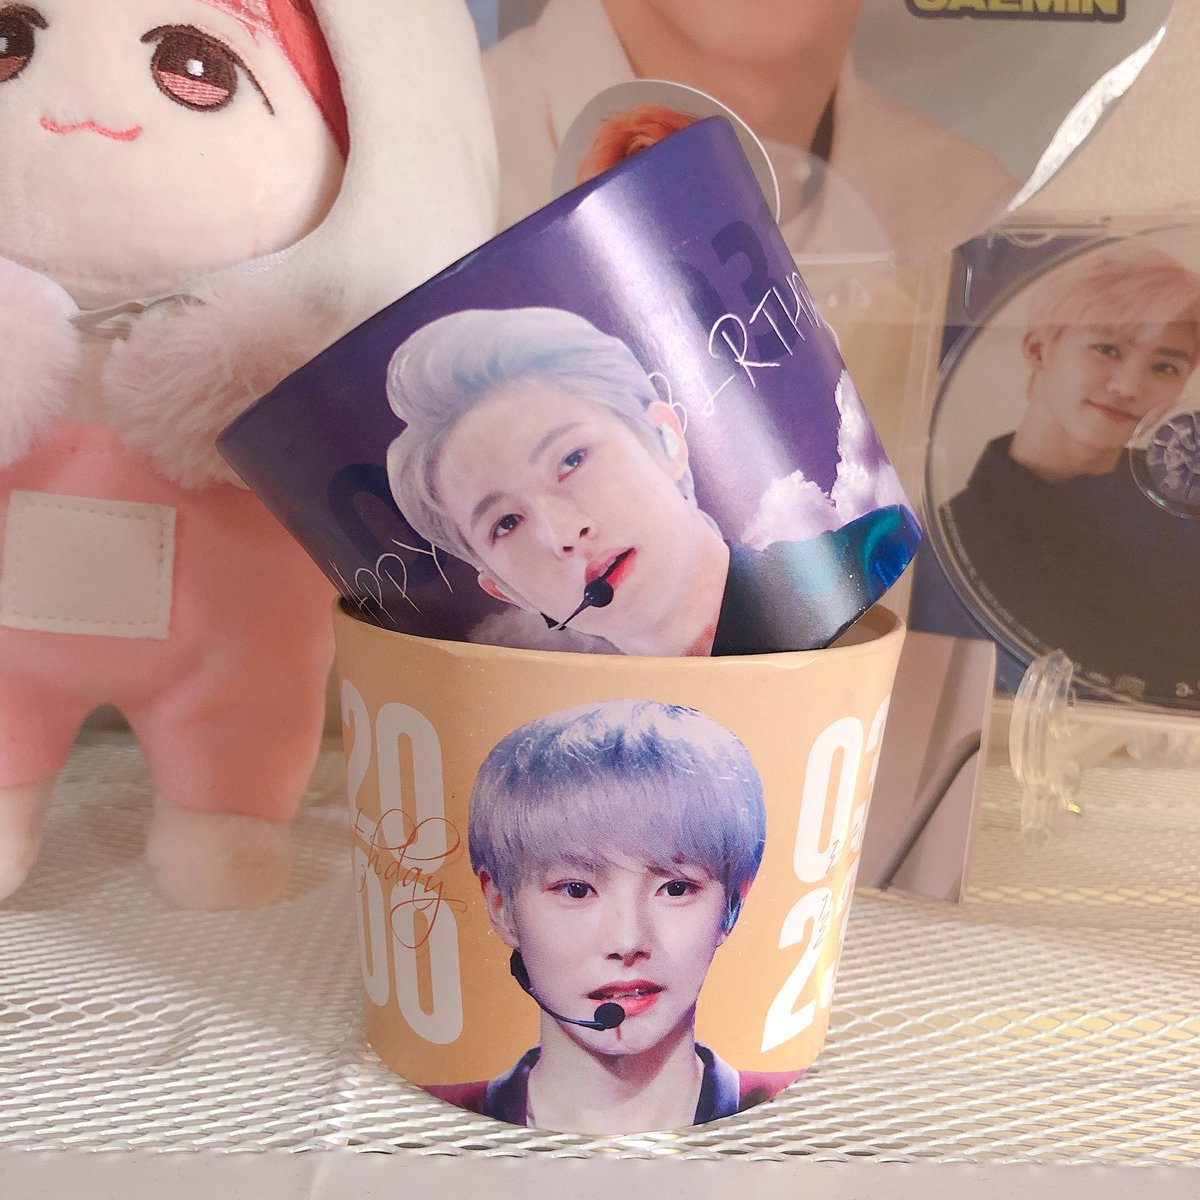 thank you  @cherryjaemjen for helping me find jaemin  and thank you as well po  @exoclhermes for trading with me  the rj cupsleeves are really pretty!!